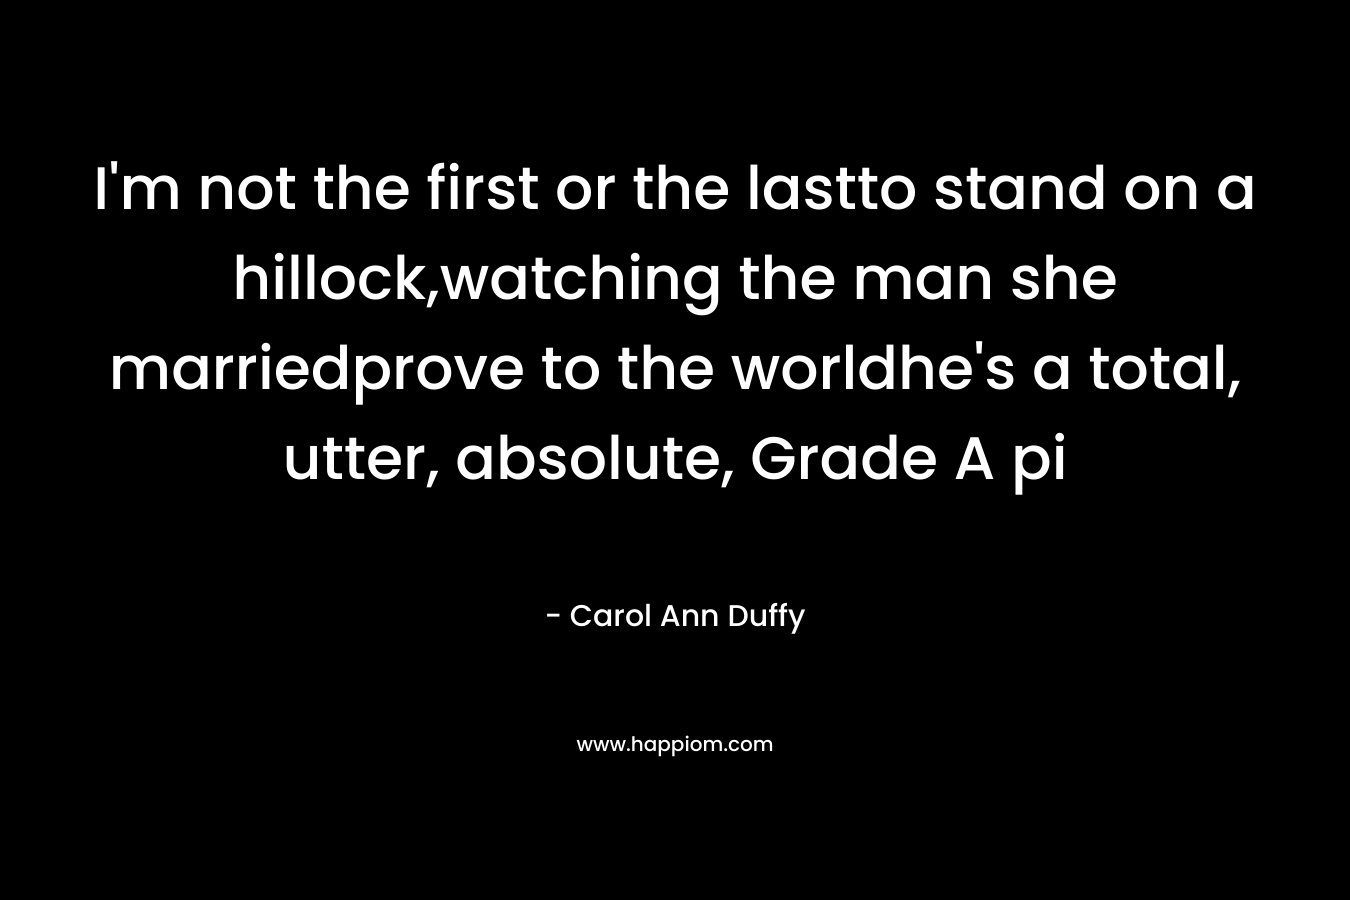 I’m not the first or the lastto stand on a hillock,watching the man she marriedprove to the worldhe’s a total, utter, absolute, Grade A pi – Carol Ann Duffy